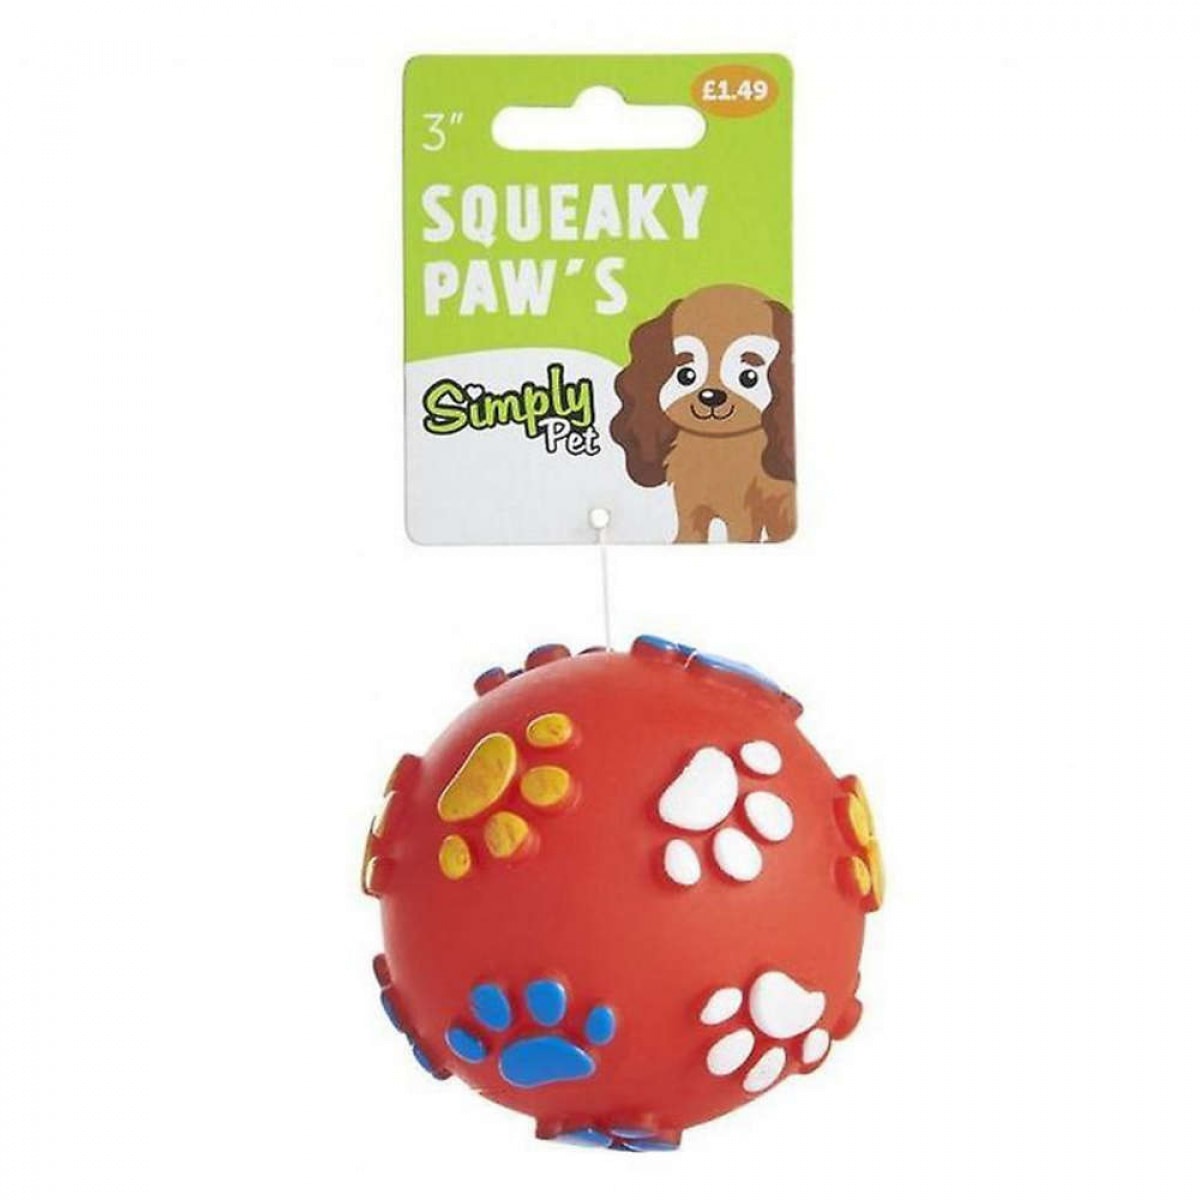 Squeaky Paw Dog Toy Main Image